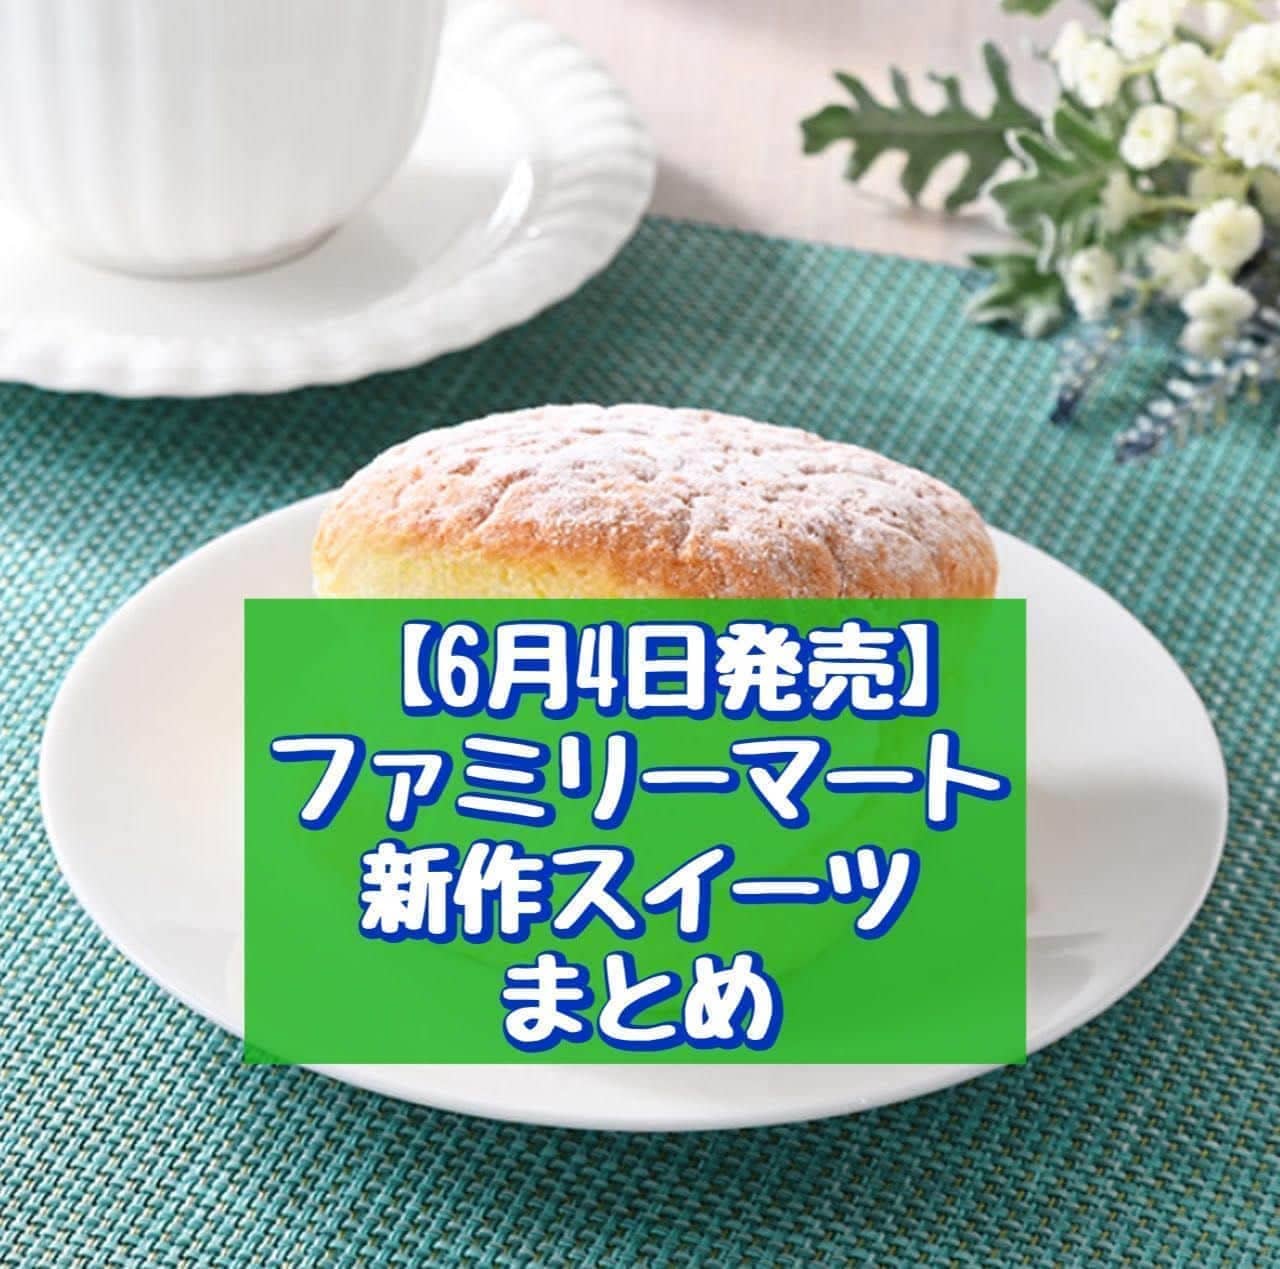 FamilyMart's new sweet products will go on sale on June 4.